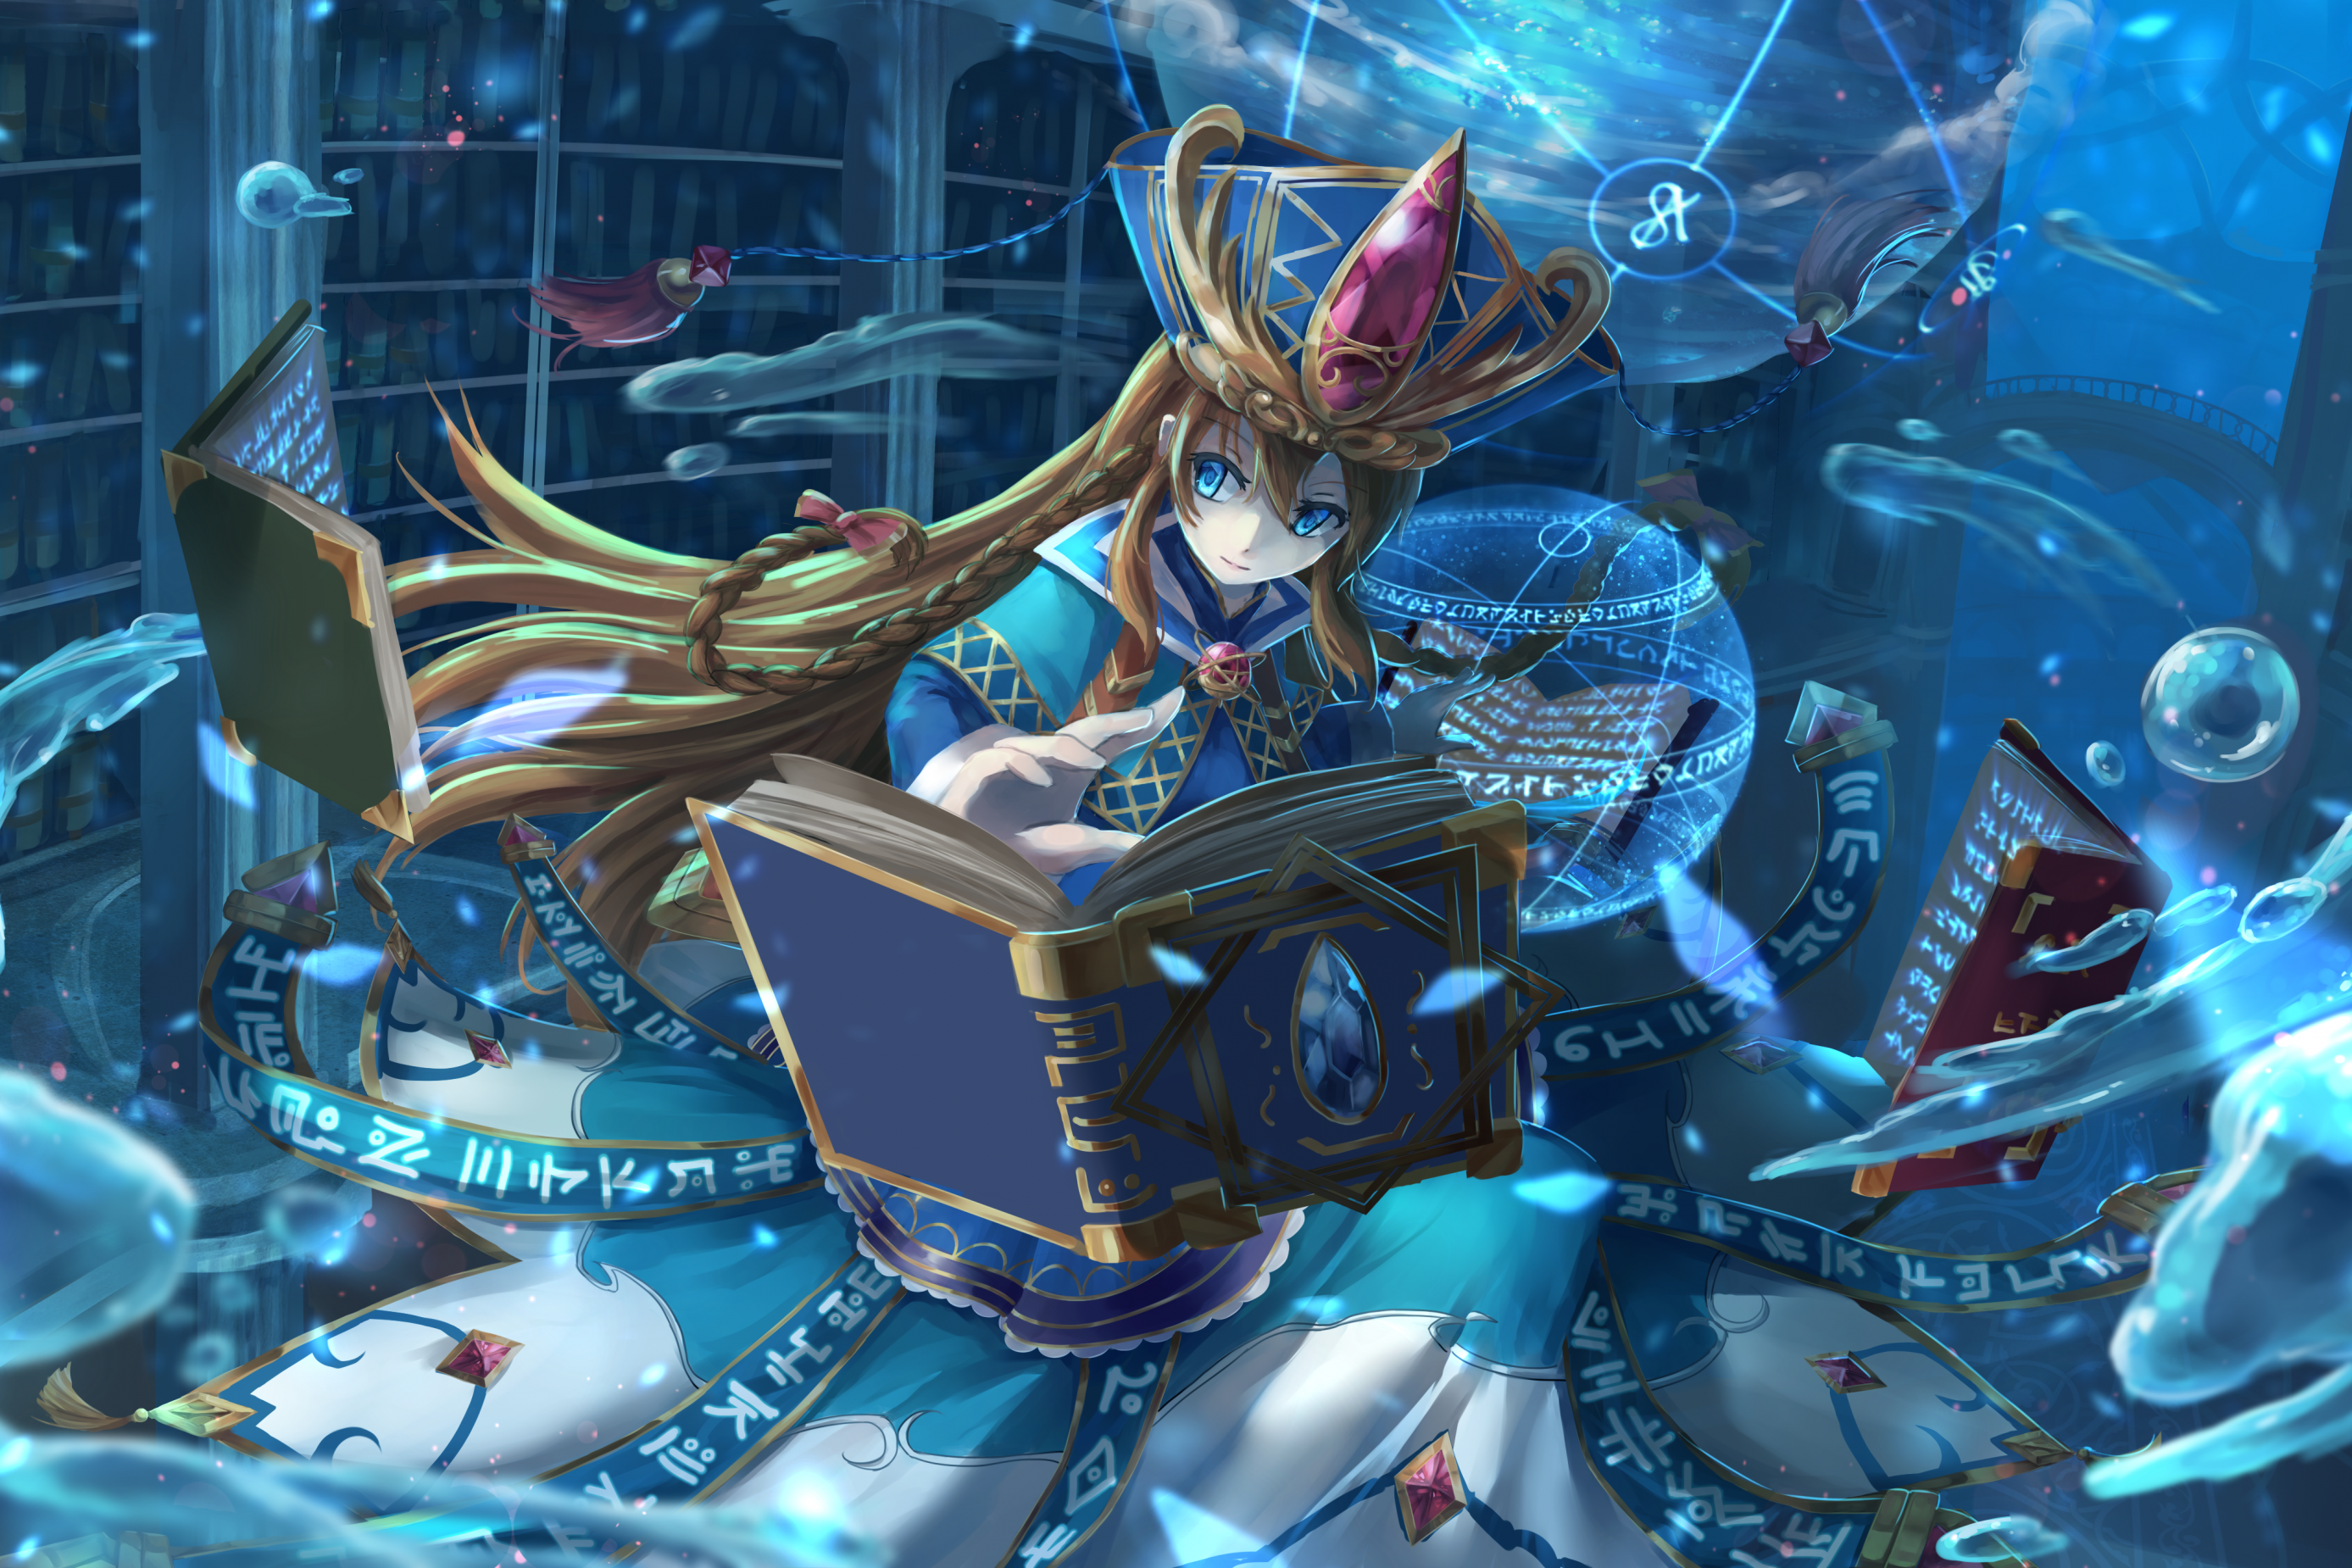 Download 2775x1850 Brave Frontier, Magic, Library, Water Drops